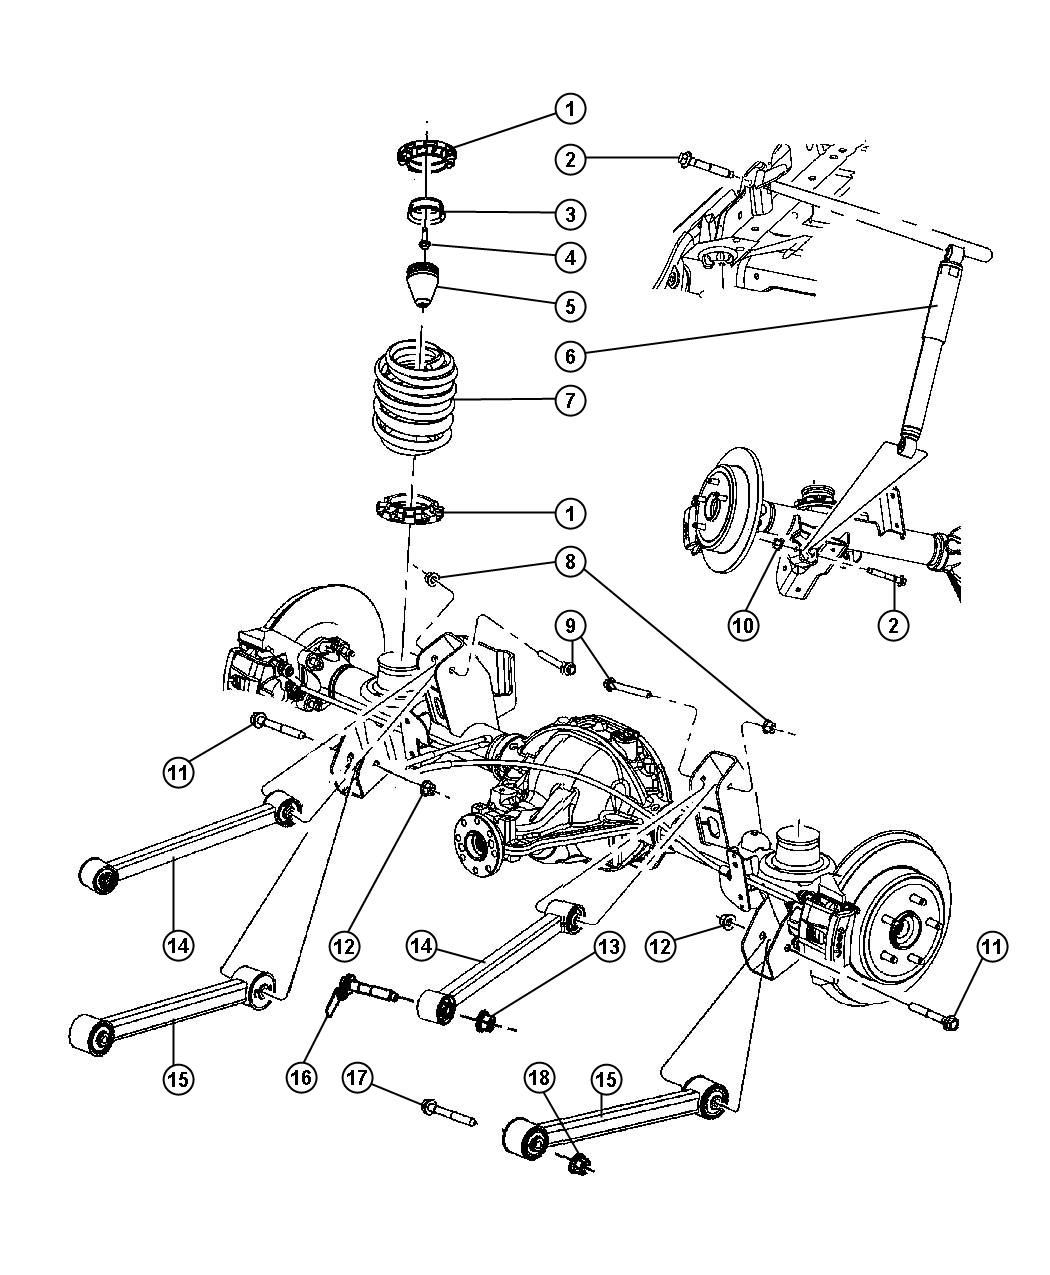 Rear Coil Springs Control Arms And Shocks. Diagram